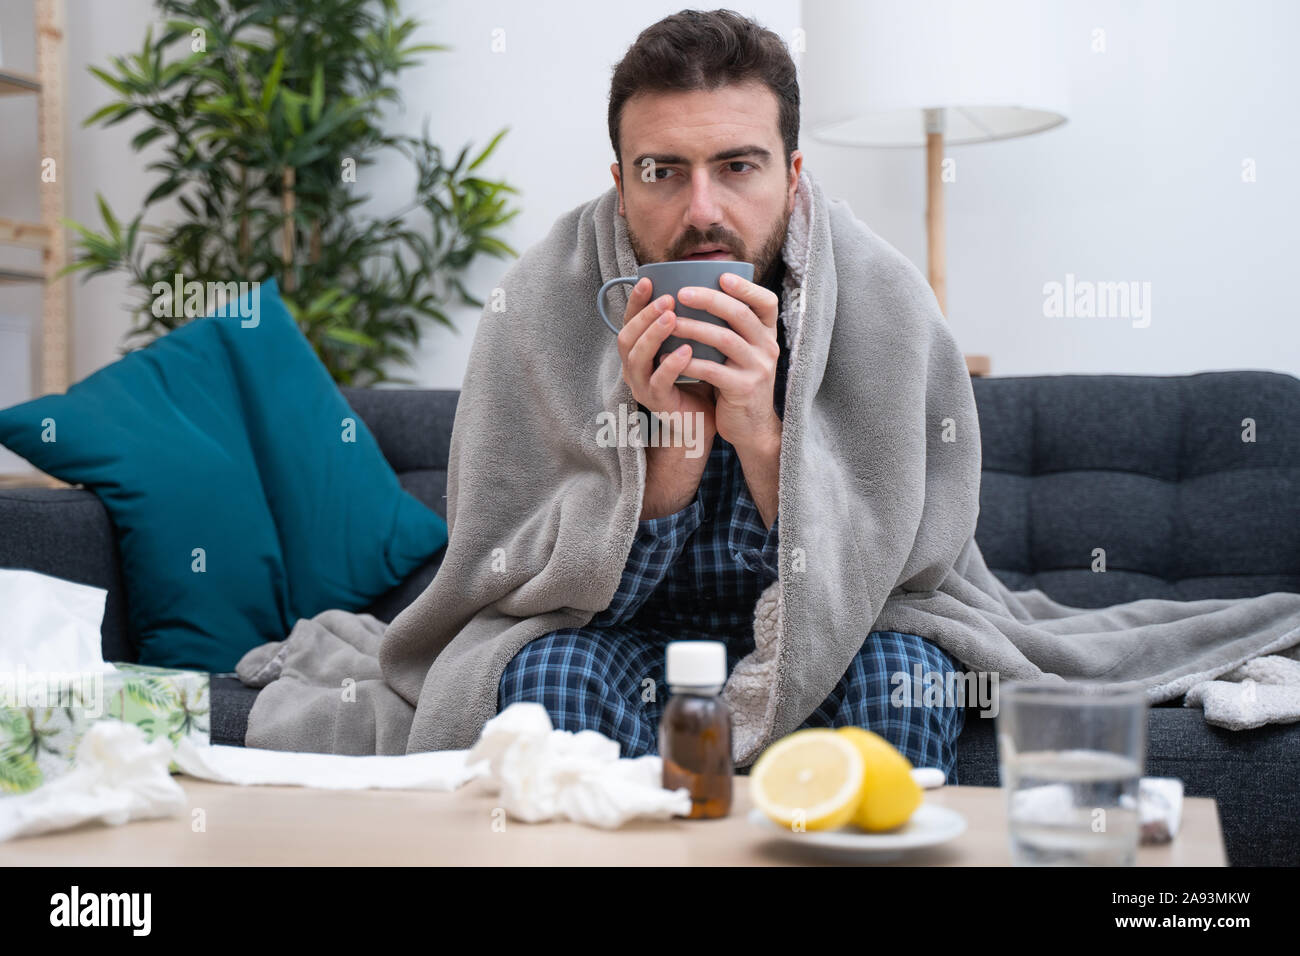 Man portrait suffering cold and flu at home Stock Photo